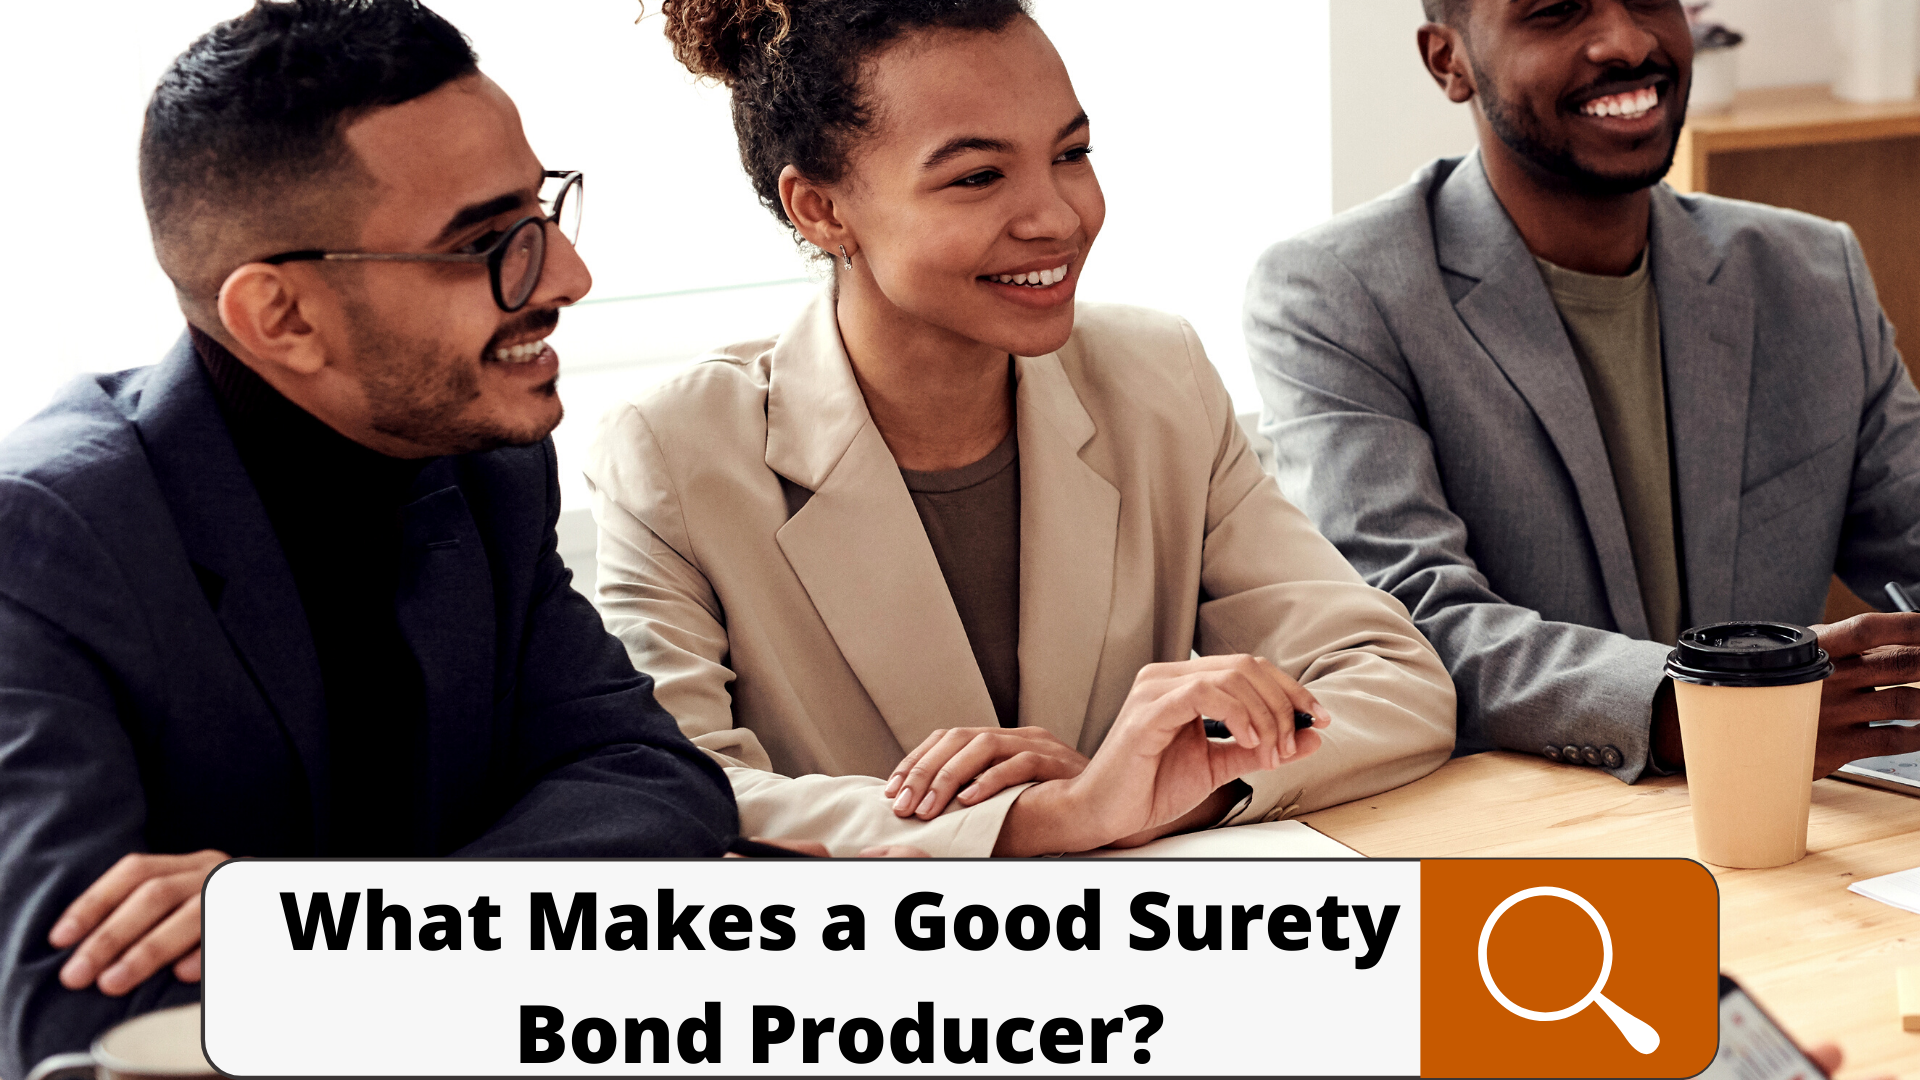 surety bond - What qualities do you look for in a surety bond producer - individuals happily talking